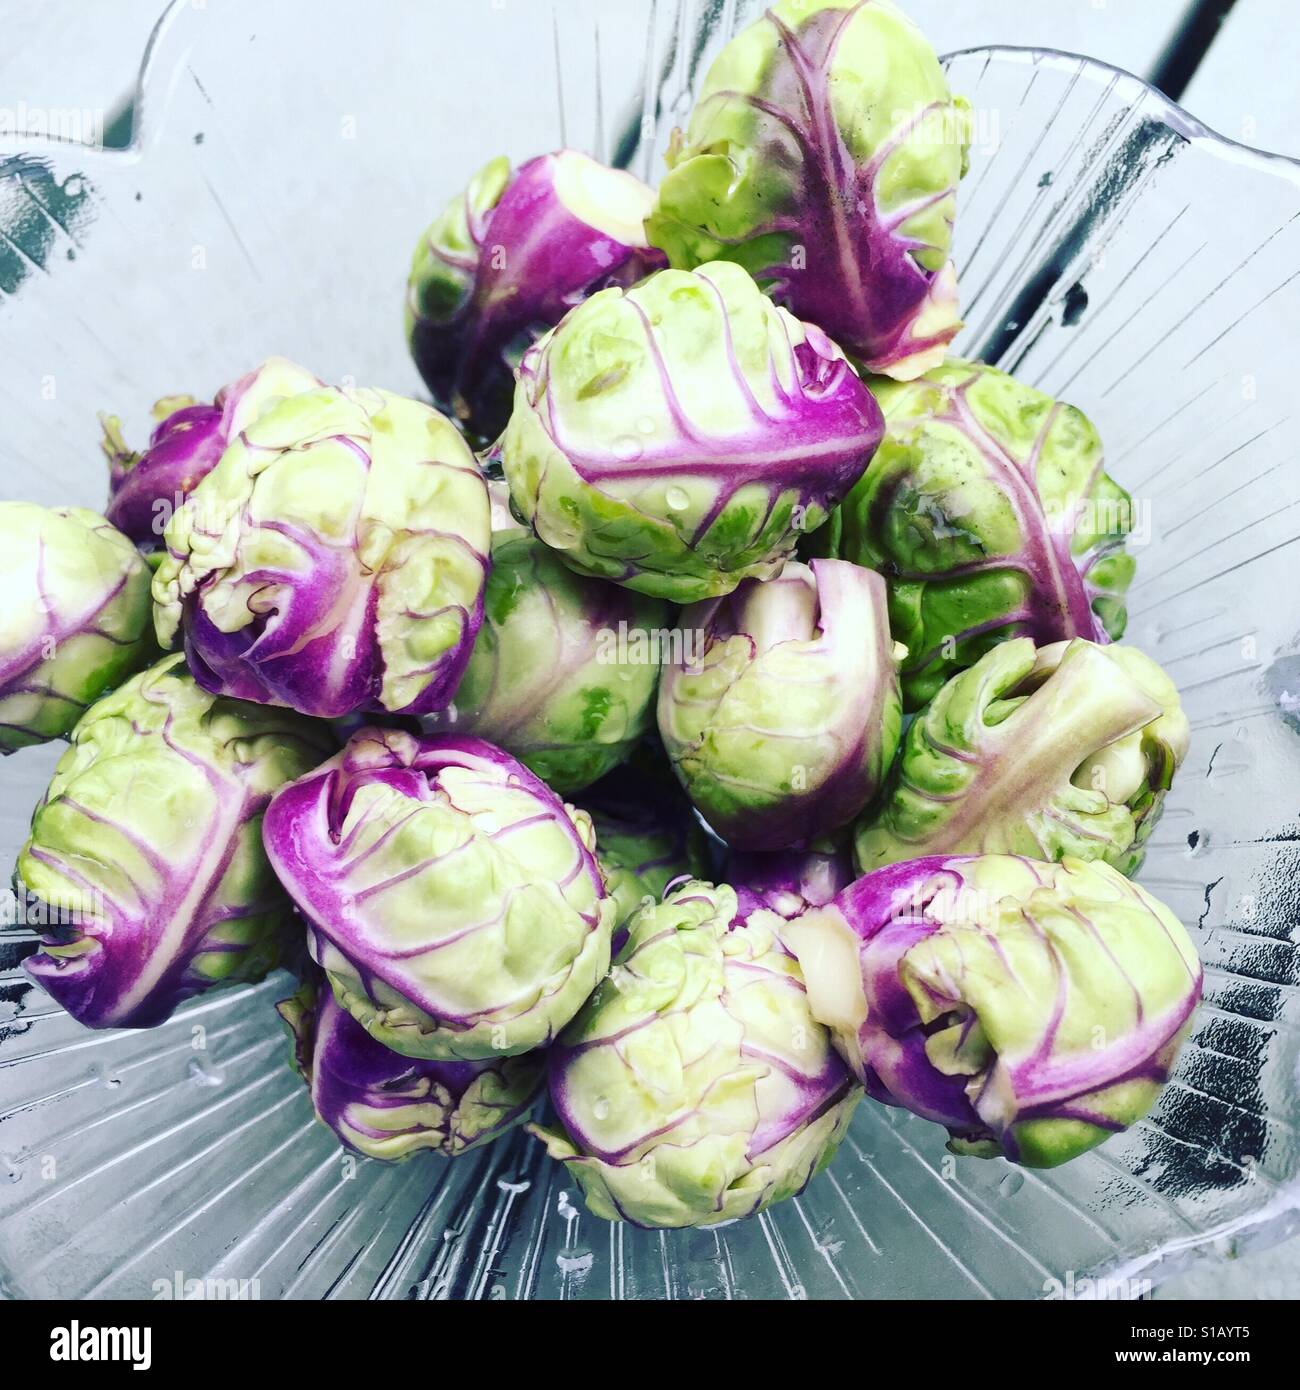 Close up of purple variety of Brussels sprouts freshly picked in an Irish garden Stock Photo